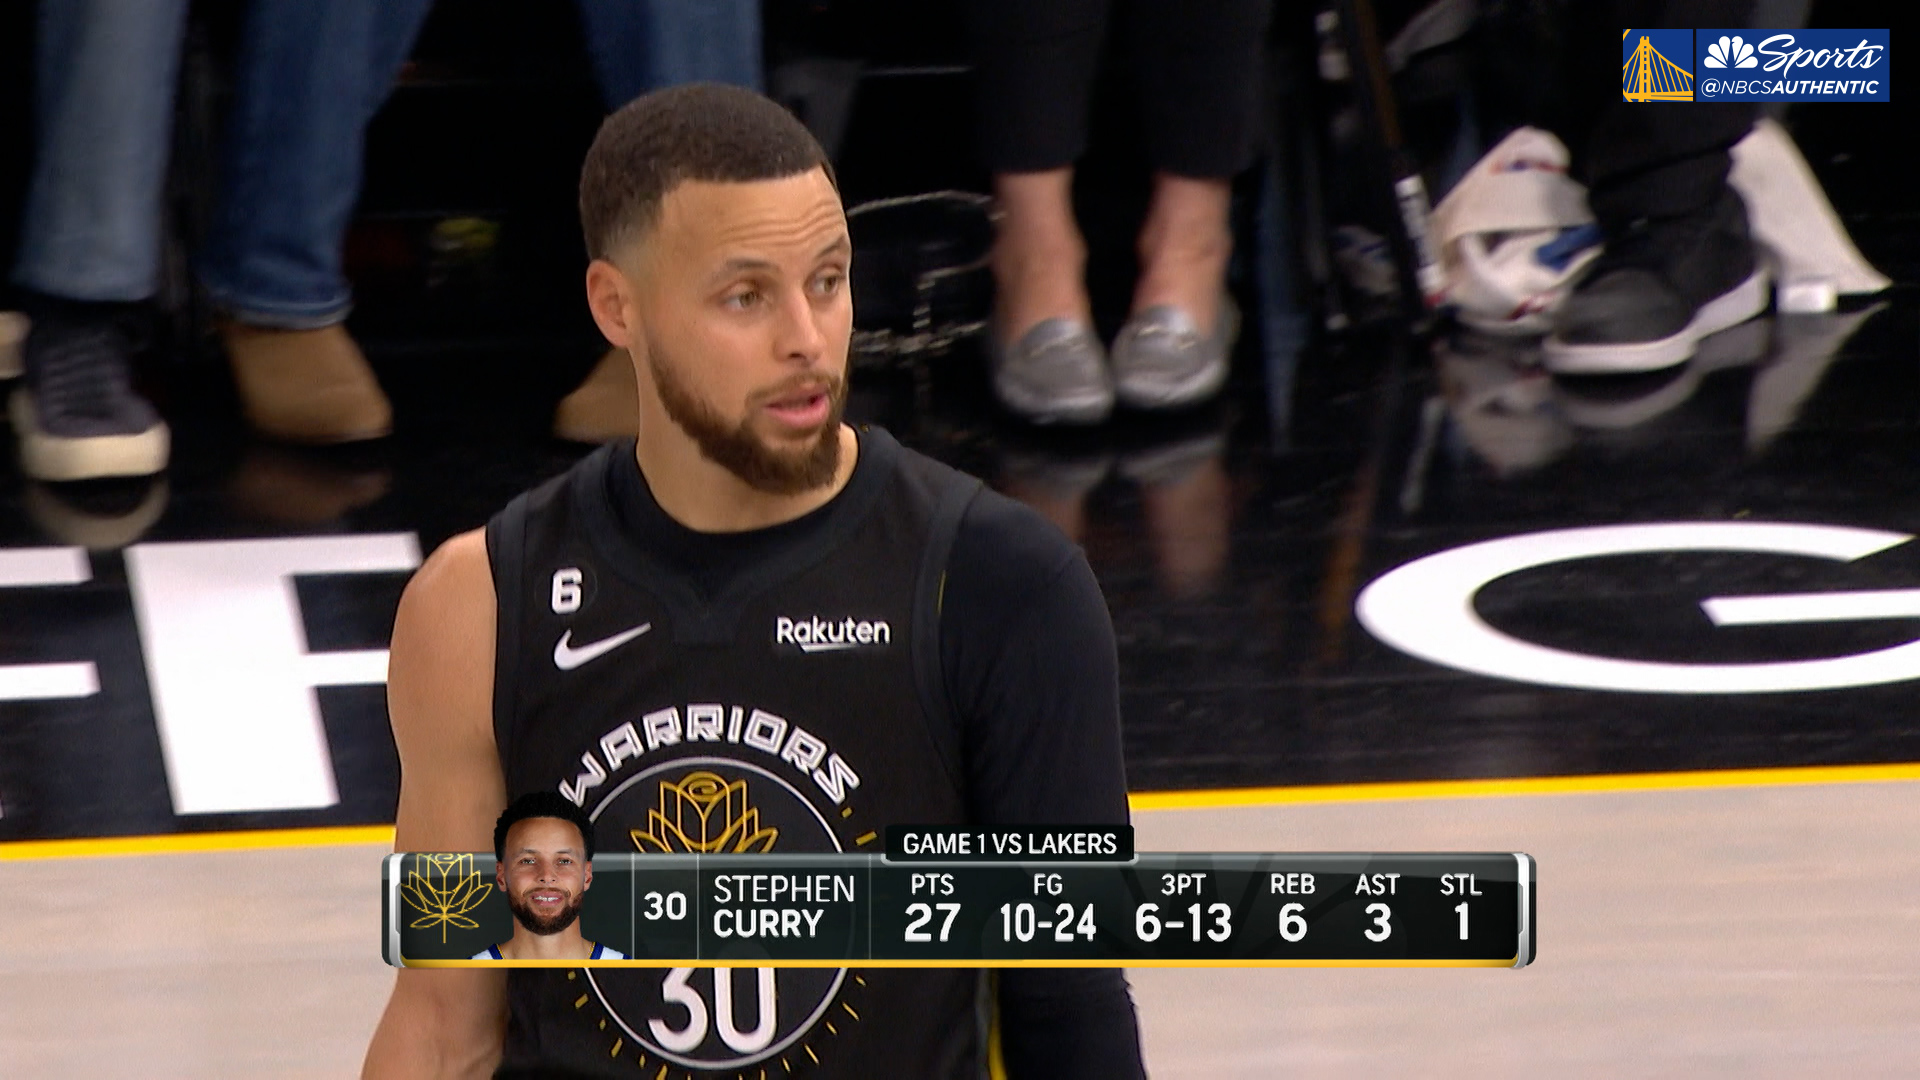 Stephen Curry with 27 Points vs. Los Angeles Lakers